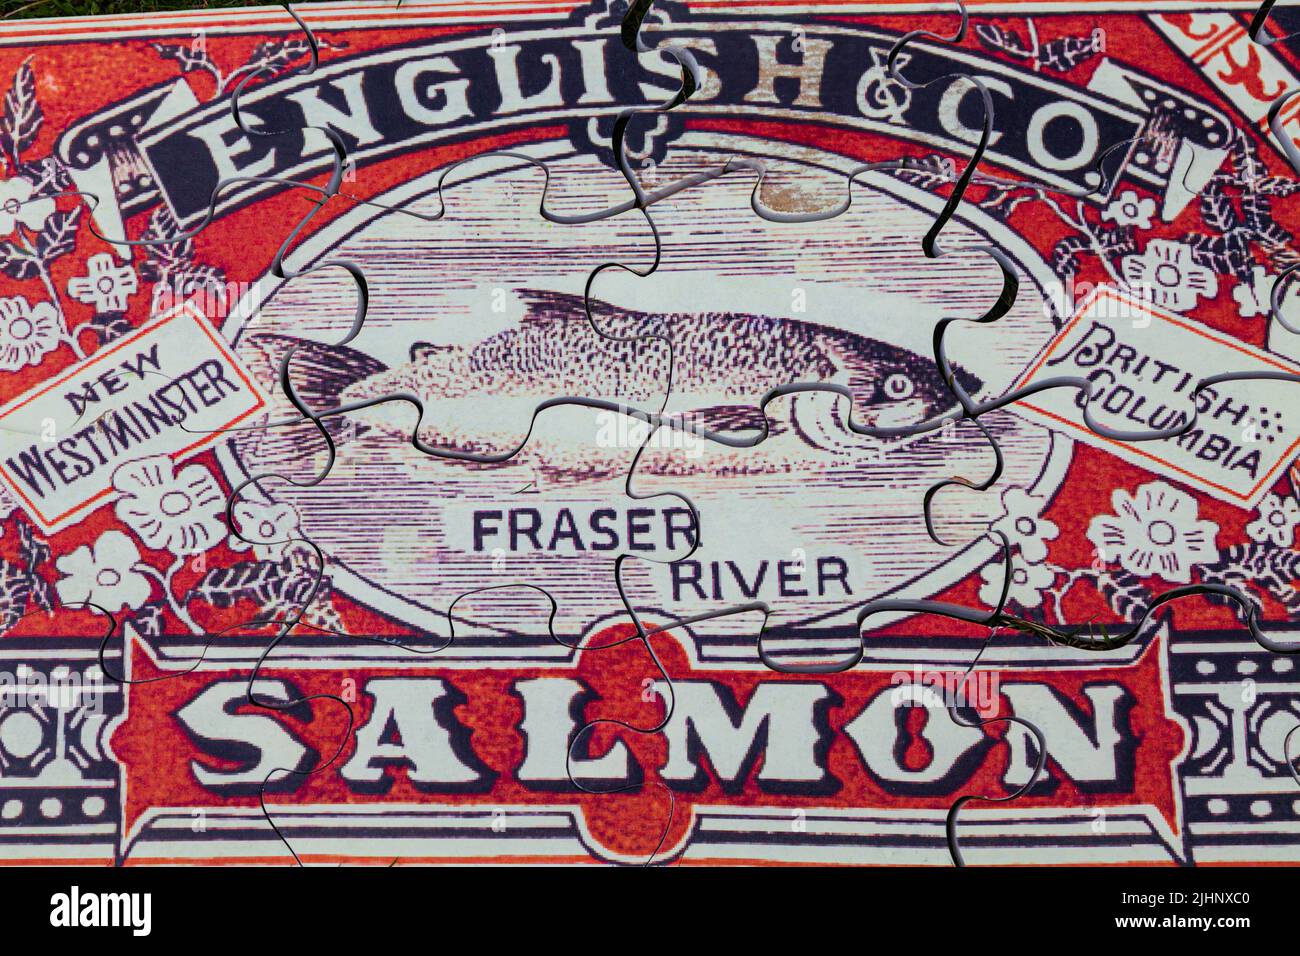 Heritage canned Salmon label enlarged for a giant sized jigsaw puzzle in Steveston British Columbia Canada Stock Photo